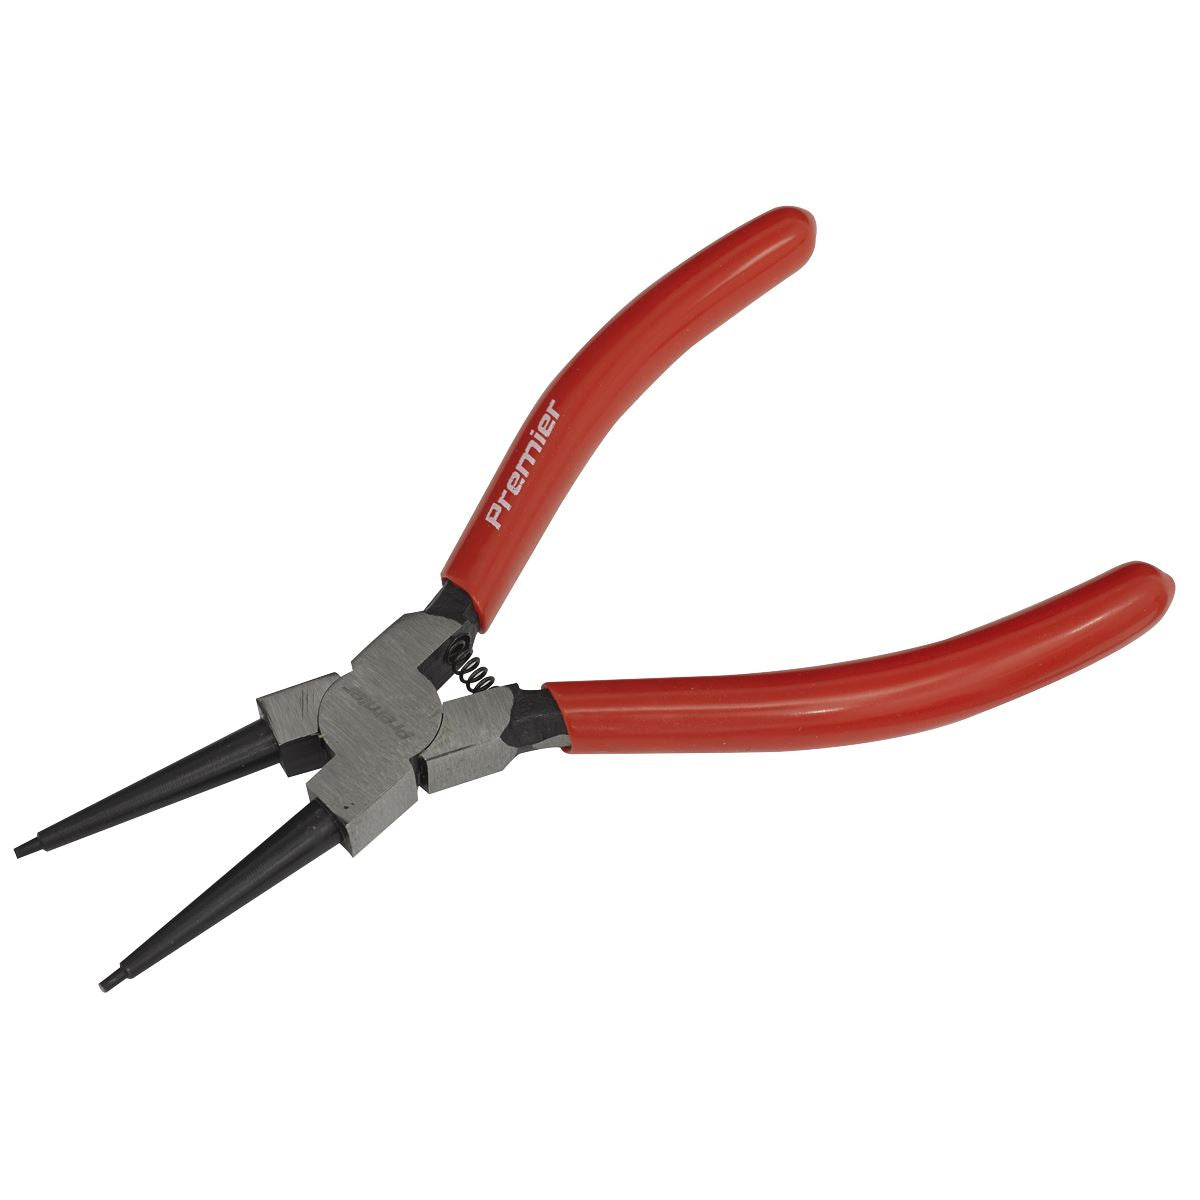 Sealey Premier Circlip Pliers Internal Straight Nose 140mm